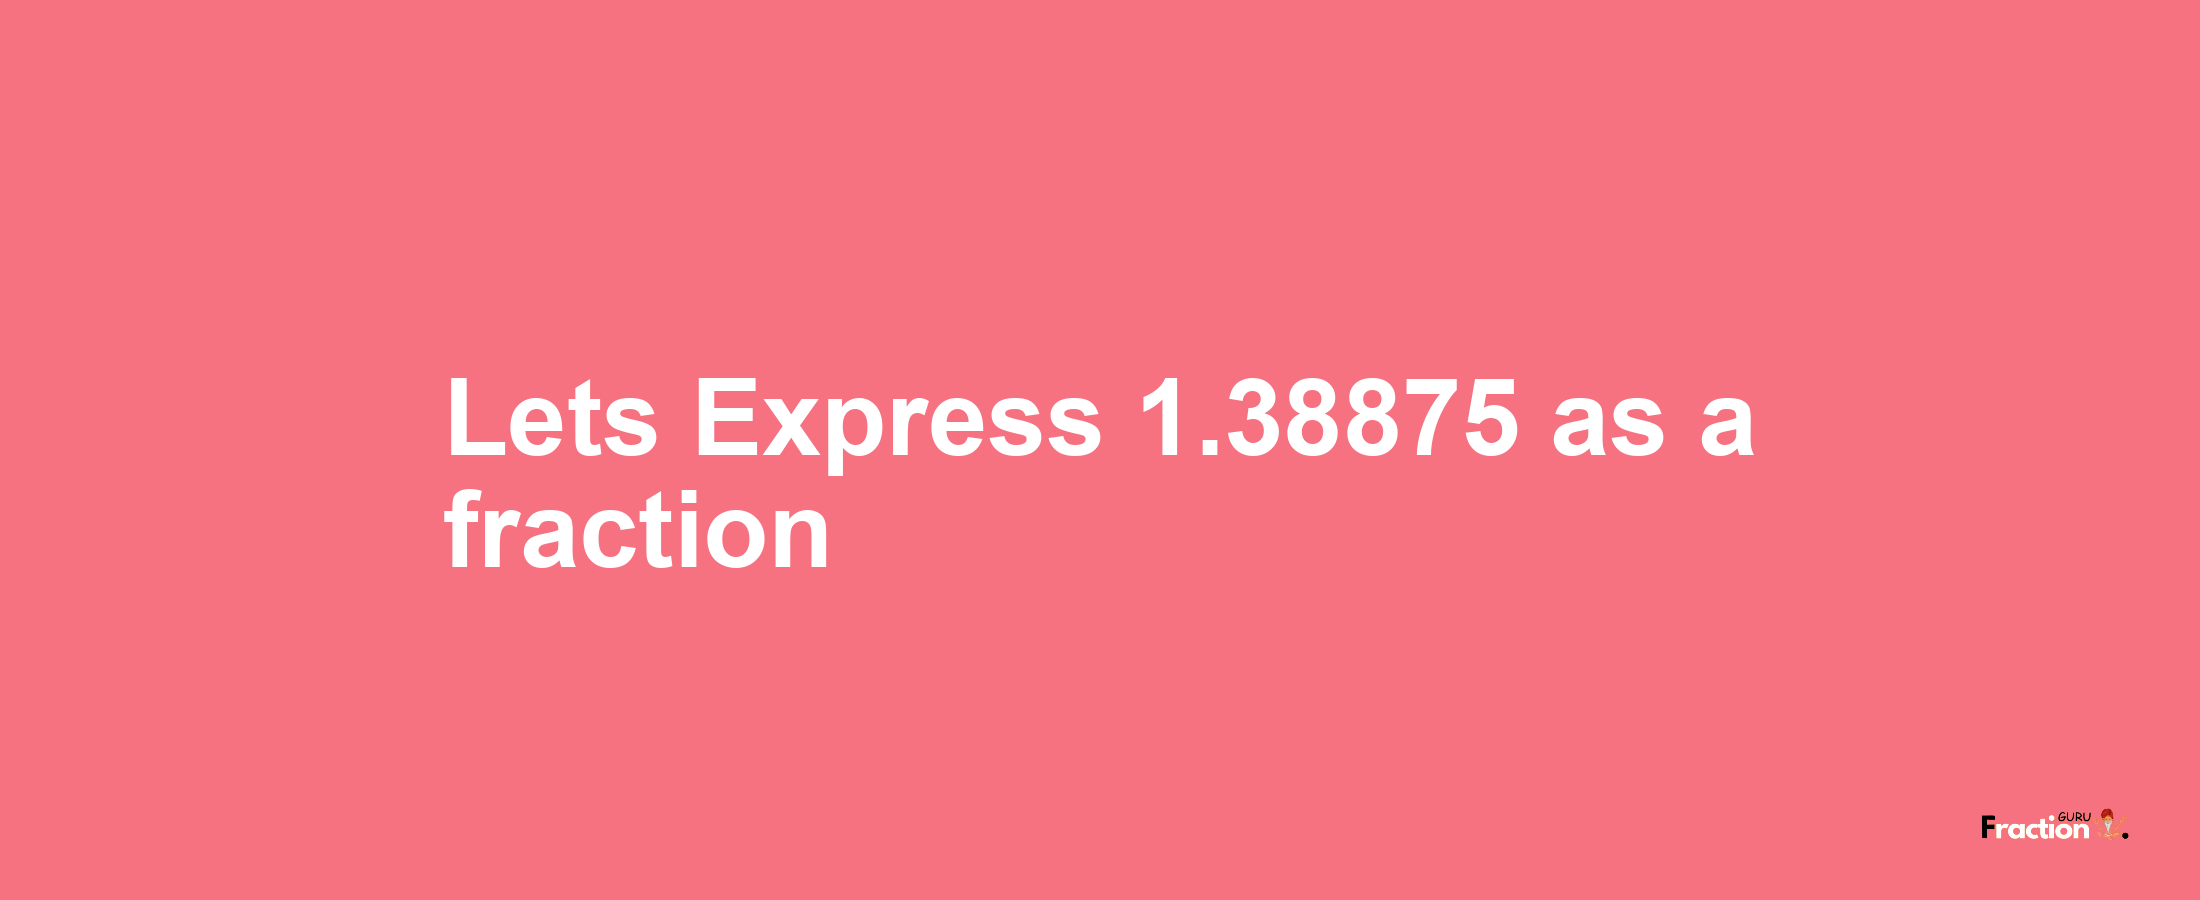 Lets Express 1.38875 as afraction